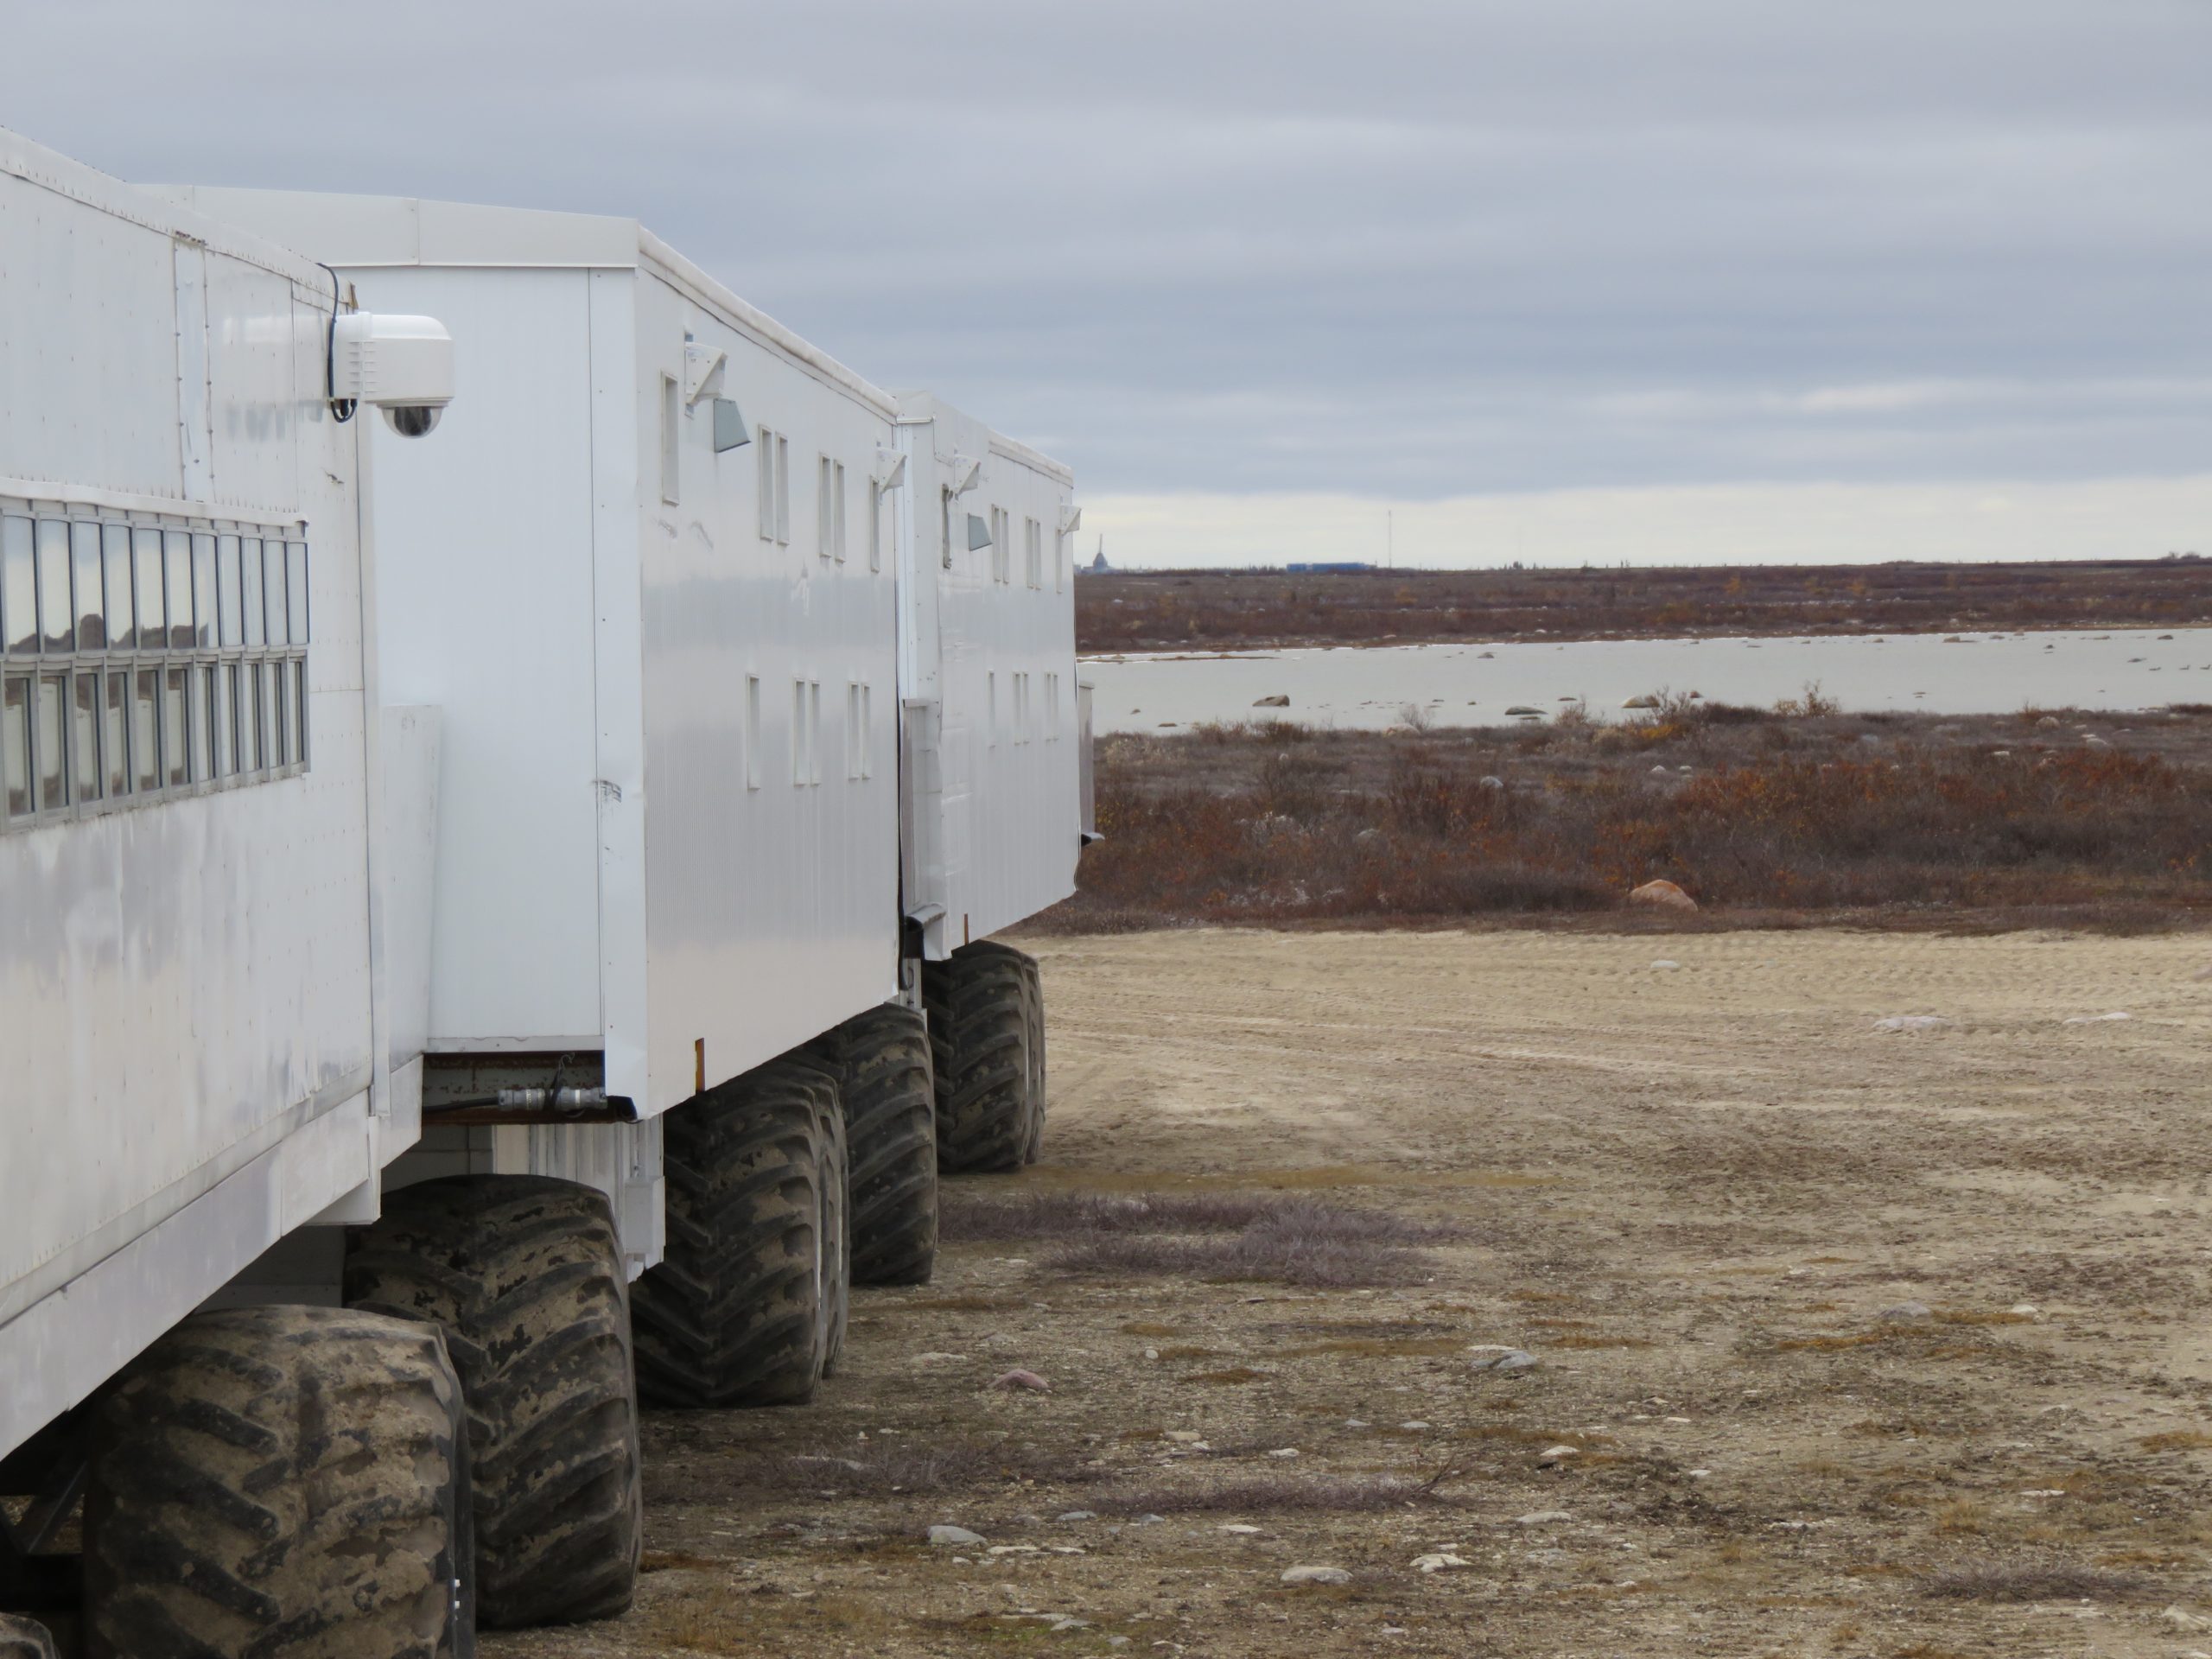 XHeat Climate Controlled PTZ Camera Enclosure System For Extreme Cold Conditions Installed On The Tundra Buggy Lodge In Wapusk National Park In Churchill Manitoba Canada Overlooking Polar Bears 